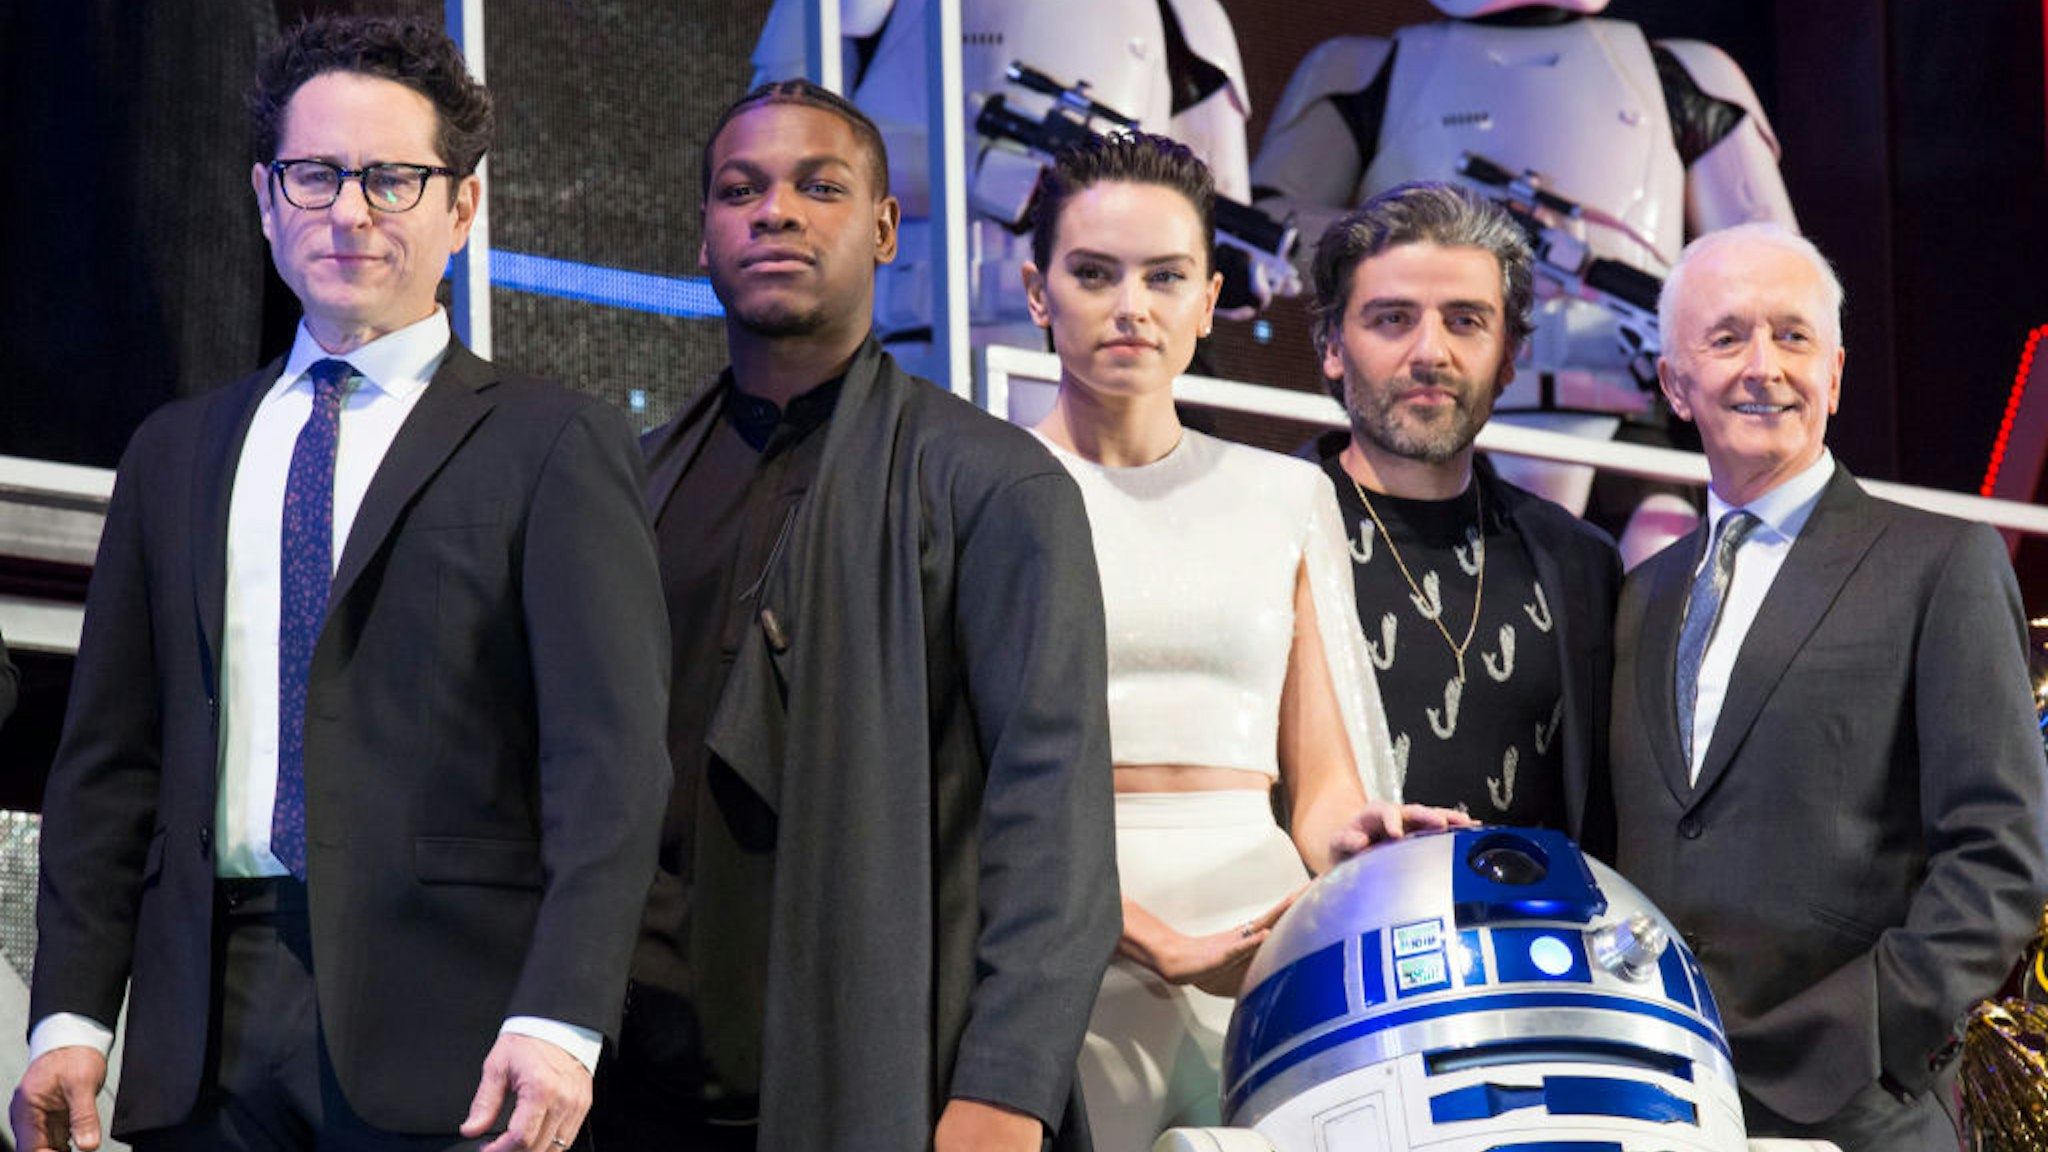 J.J. Abrams, John Boyega, Daisy Ridley, Oscar Isaac and Anthony Daniels witrh Star Wars character R2-D2 attend the special fan event for 'Star Wars: The Rise of Skywalker' at Roppongi Hills on December 11, 2019 in Tokyo, Japan. (Photo by Yuichi Yamazaki/Getty Images)